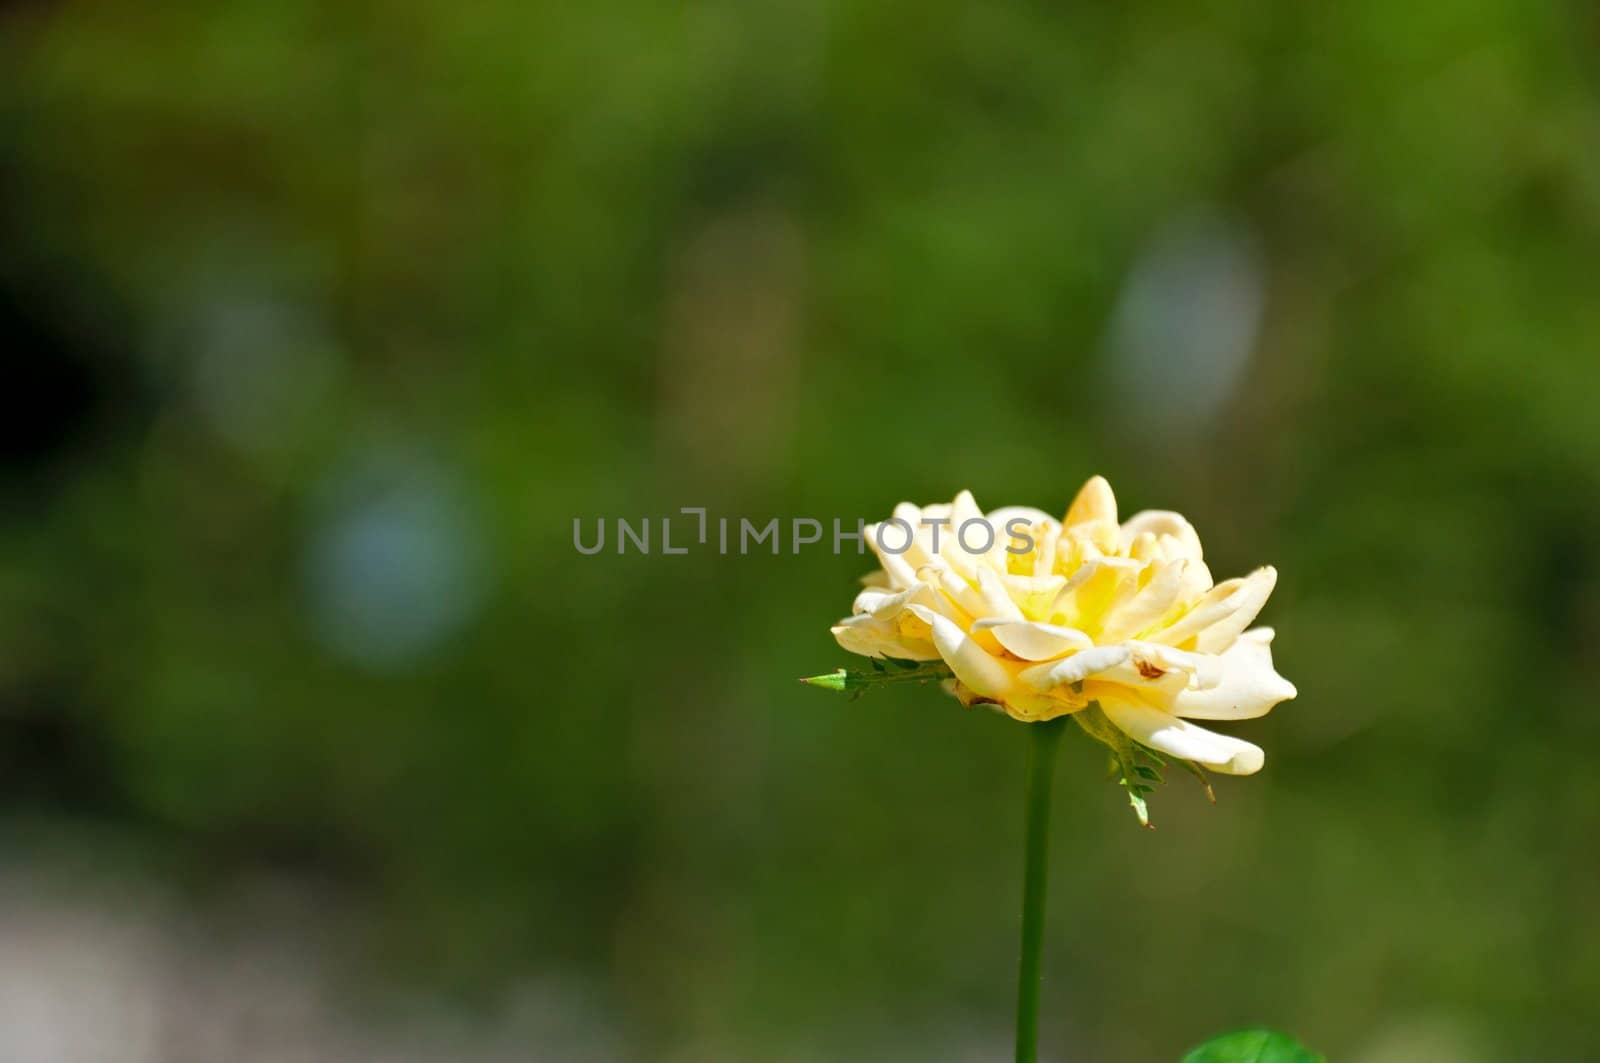 Background - a lonely yellow rose the fairy, against greens